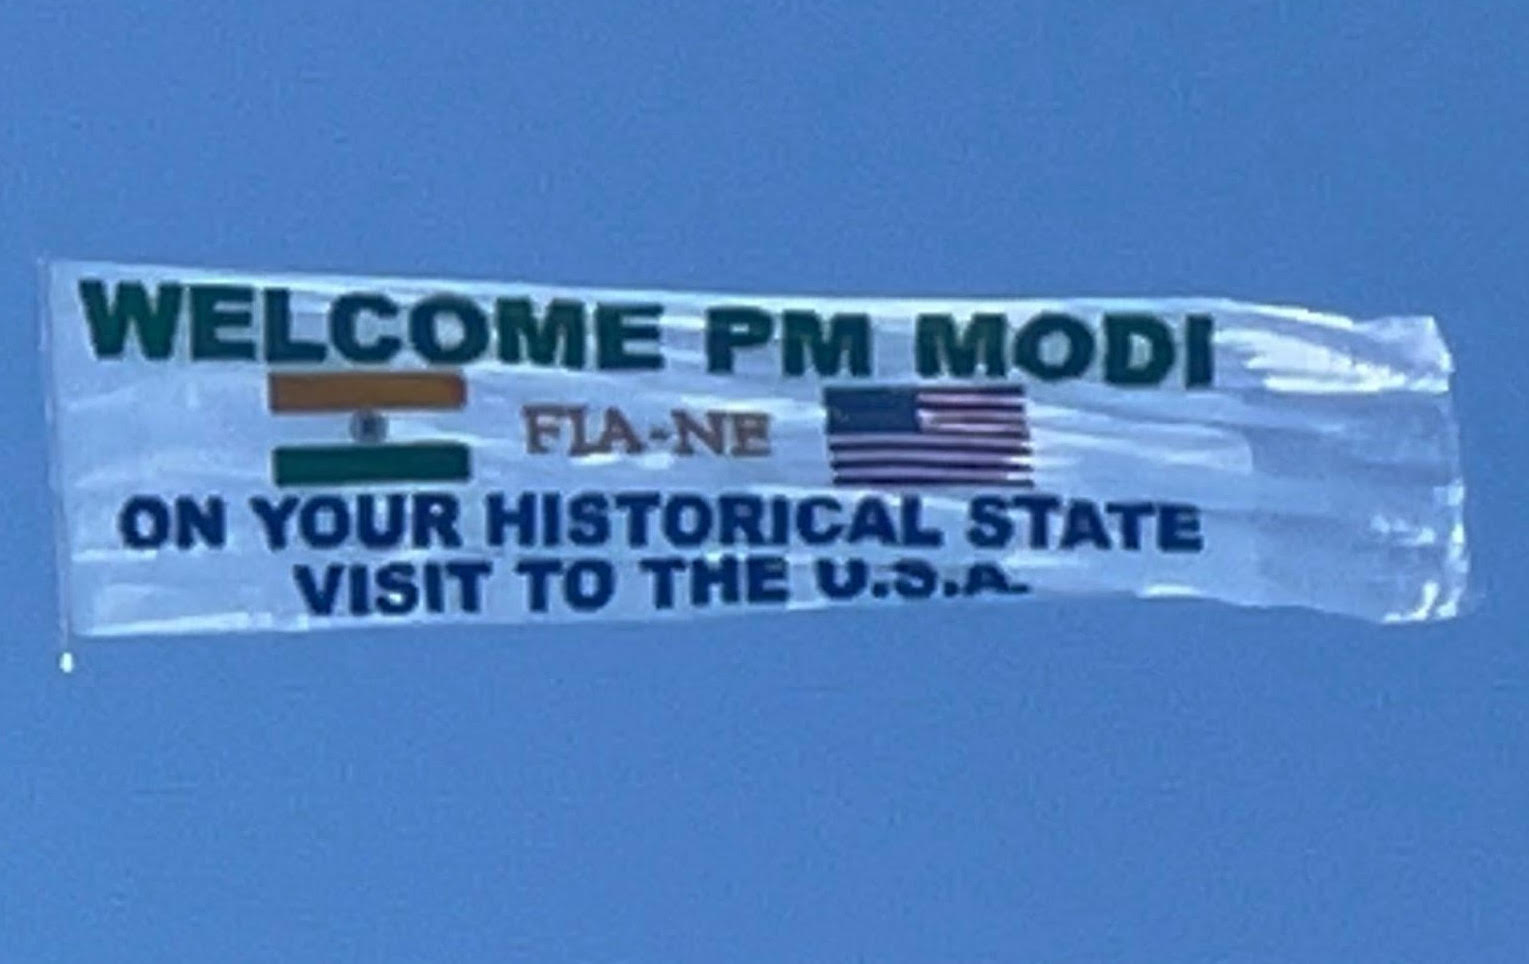 Boston Indian Diaspora Welcomes Historic Visit By Mr. Modi To USA By Land, Sea And Air